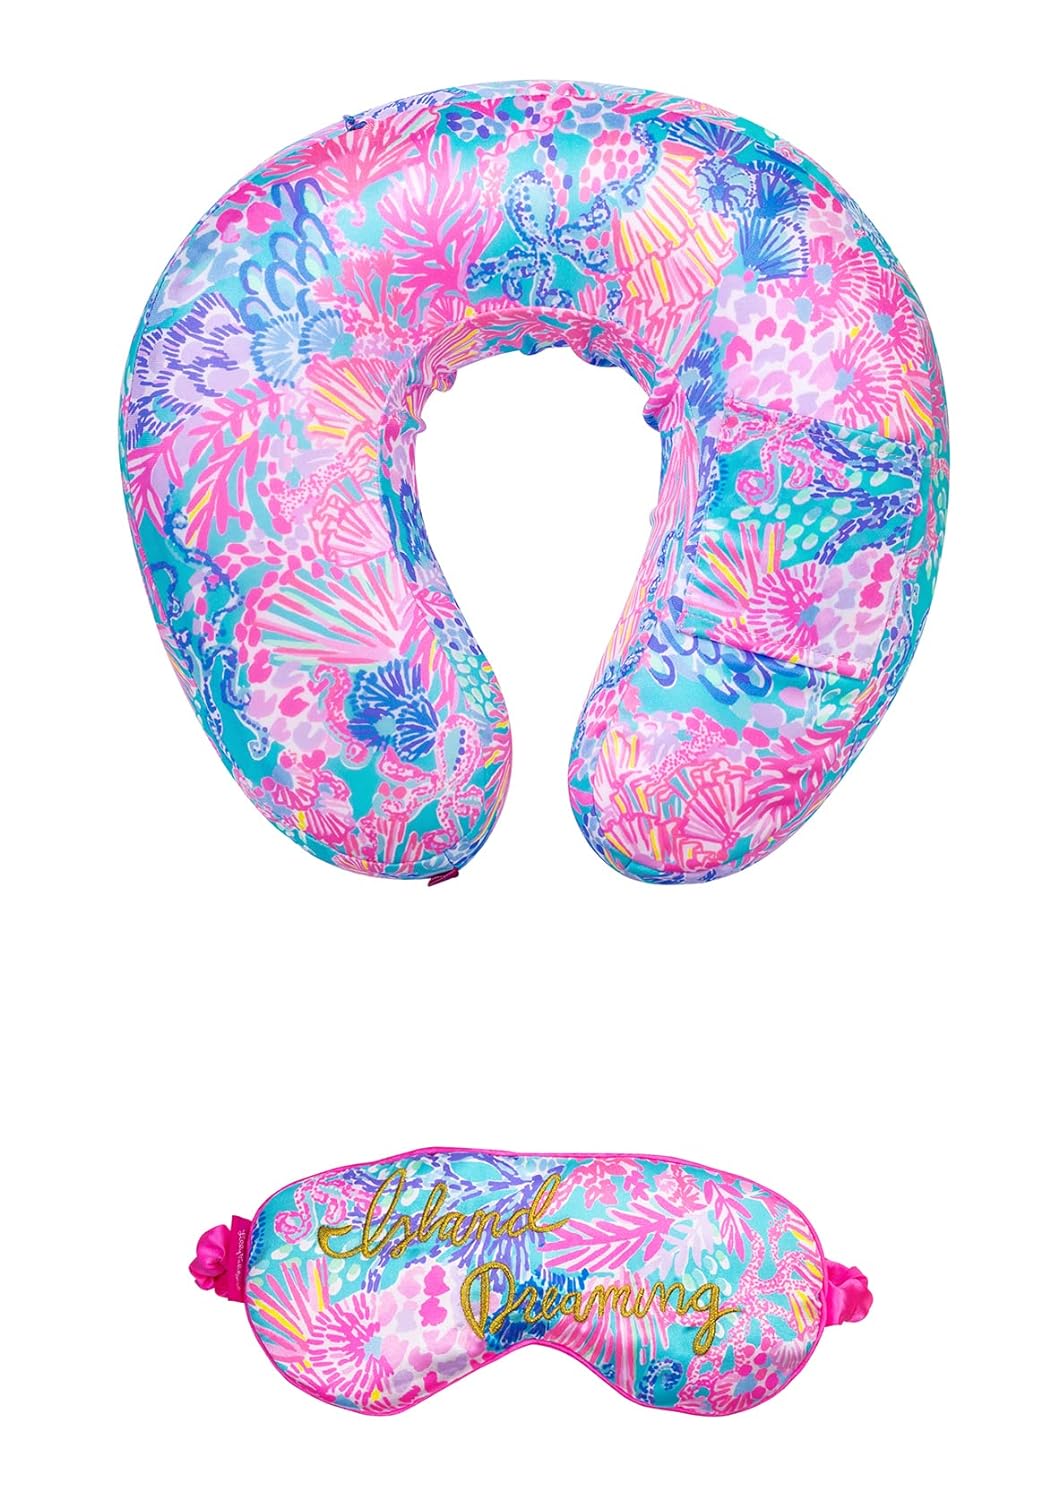 Lilly Pulitzer Travel Pillow and Eye Mask Set, Plush Neck Pillow and Adjustable Sleeping Mask, Cute Travel Accessories for Airplane, Splendor in The Sand